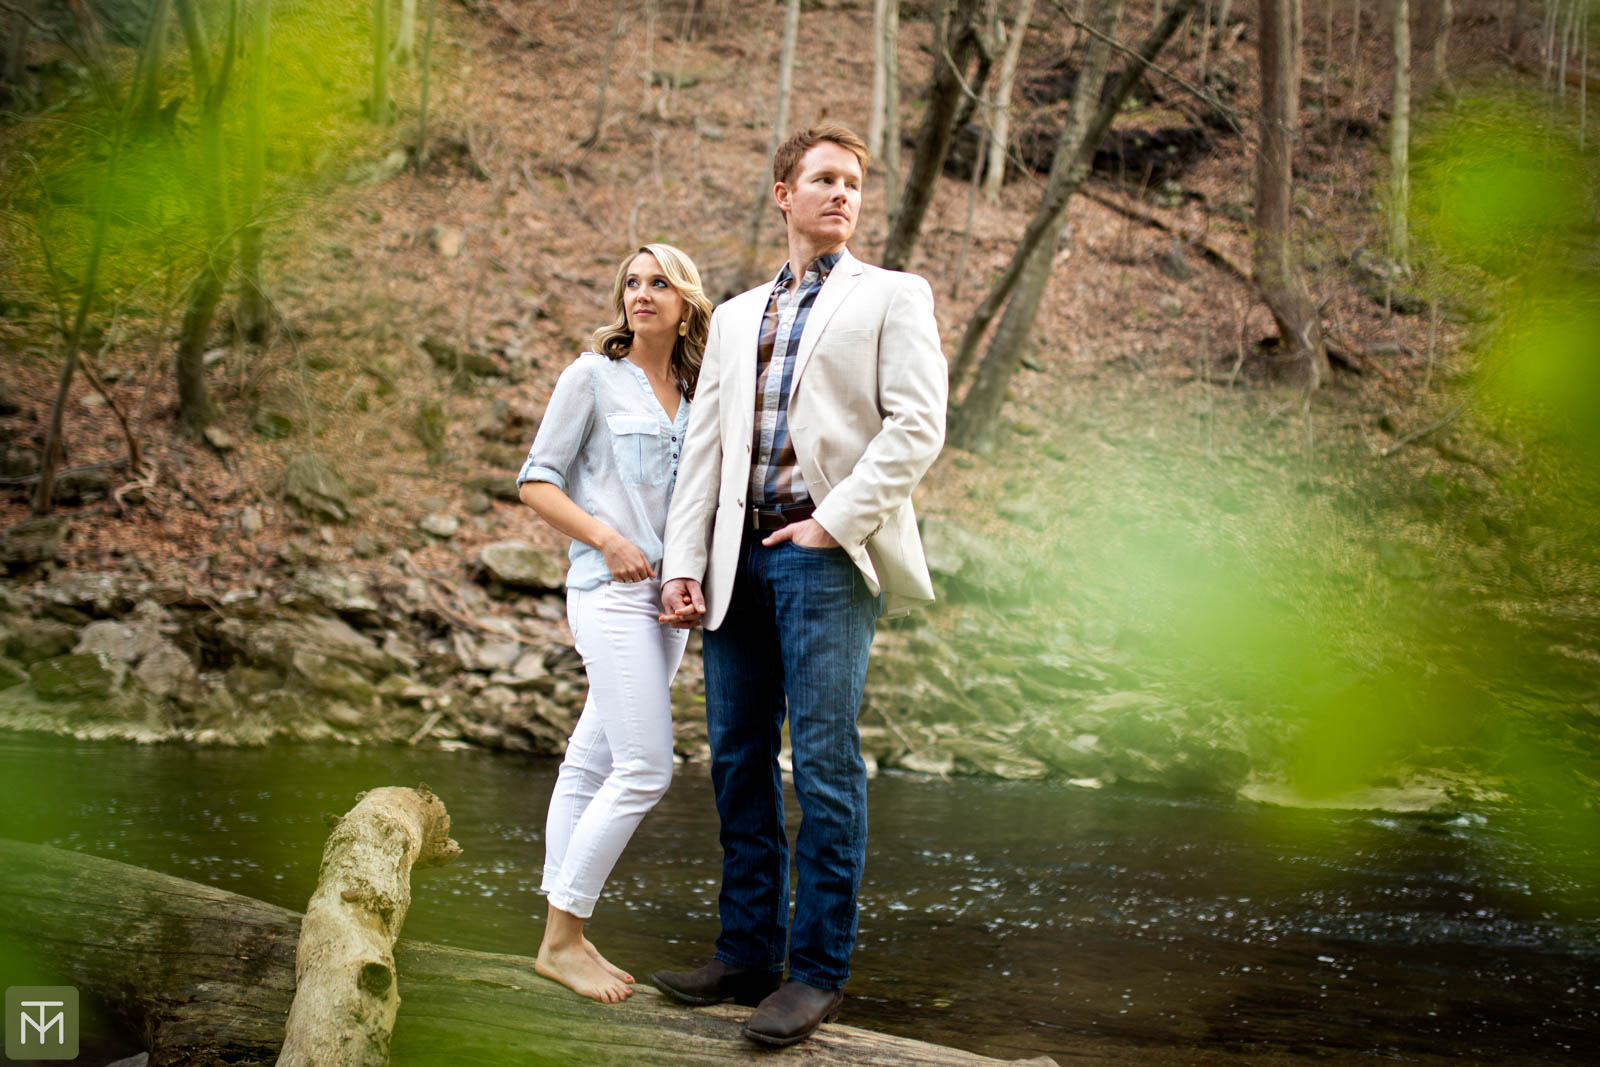 Brian & Sarah {Esession by Haley} – Tessa Marie Images